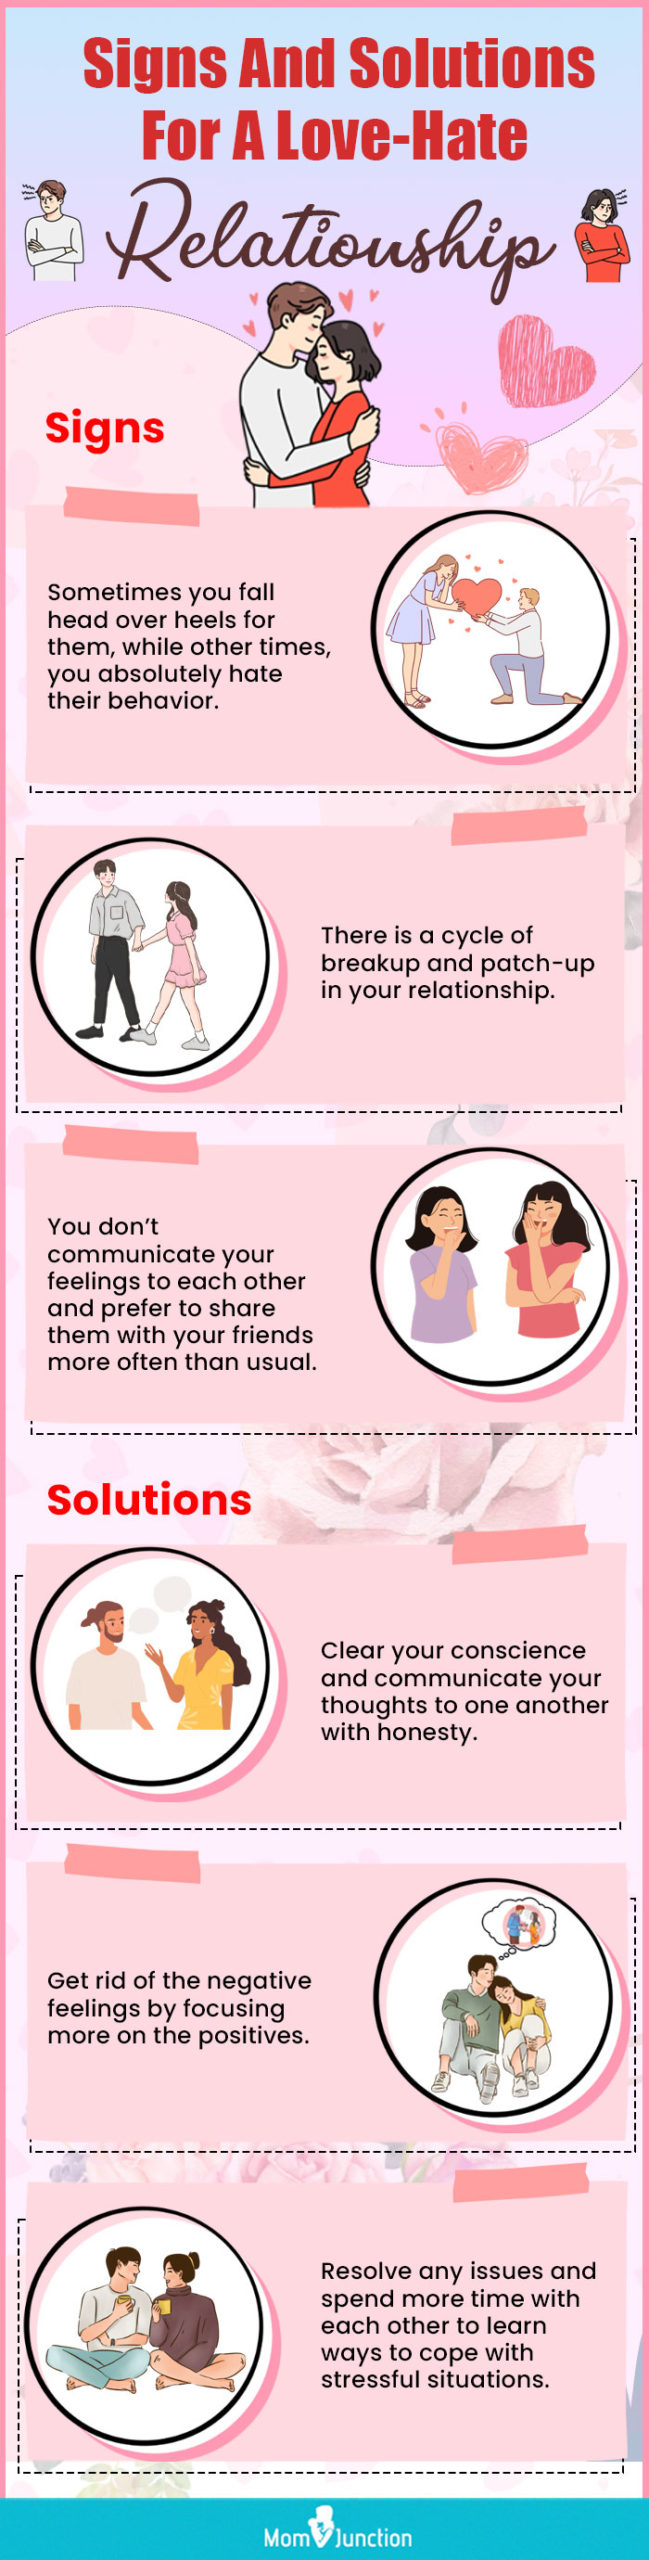 signs and solutions for a love hate relationship (infographic)